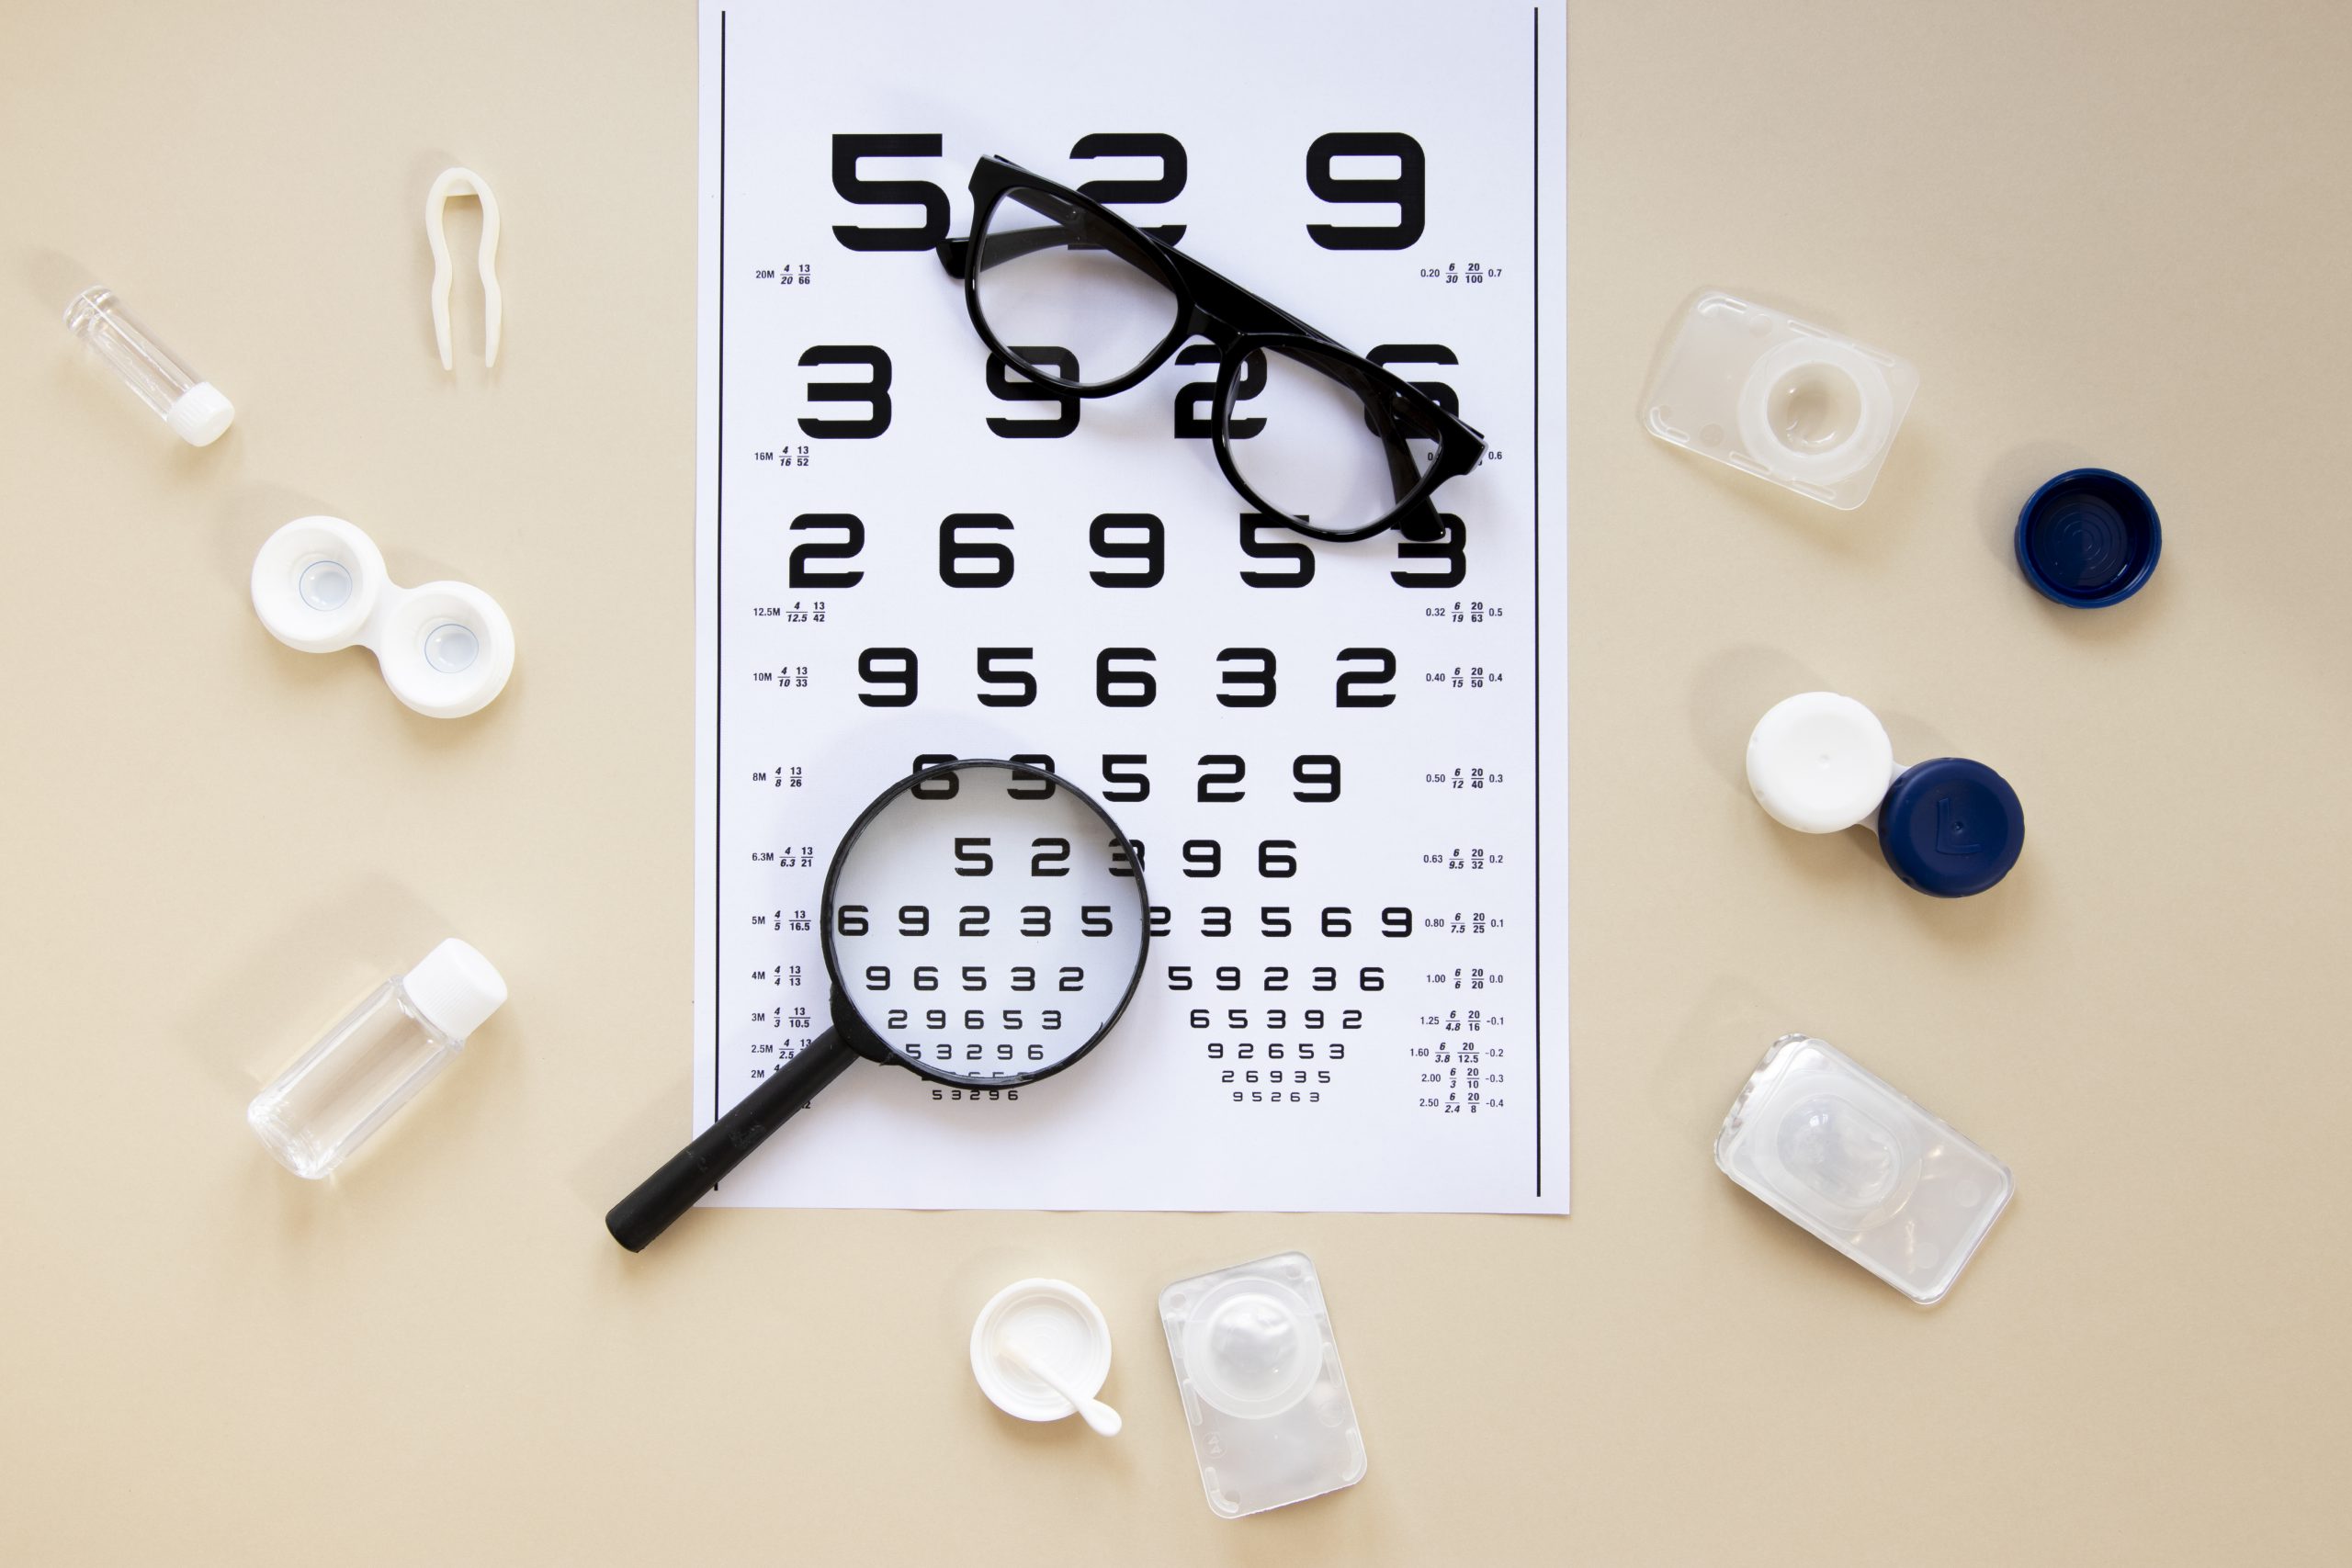 Can One Have Both Myopia(Nearsightedness) and Hypermetropia(Farsightedness